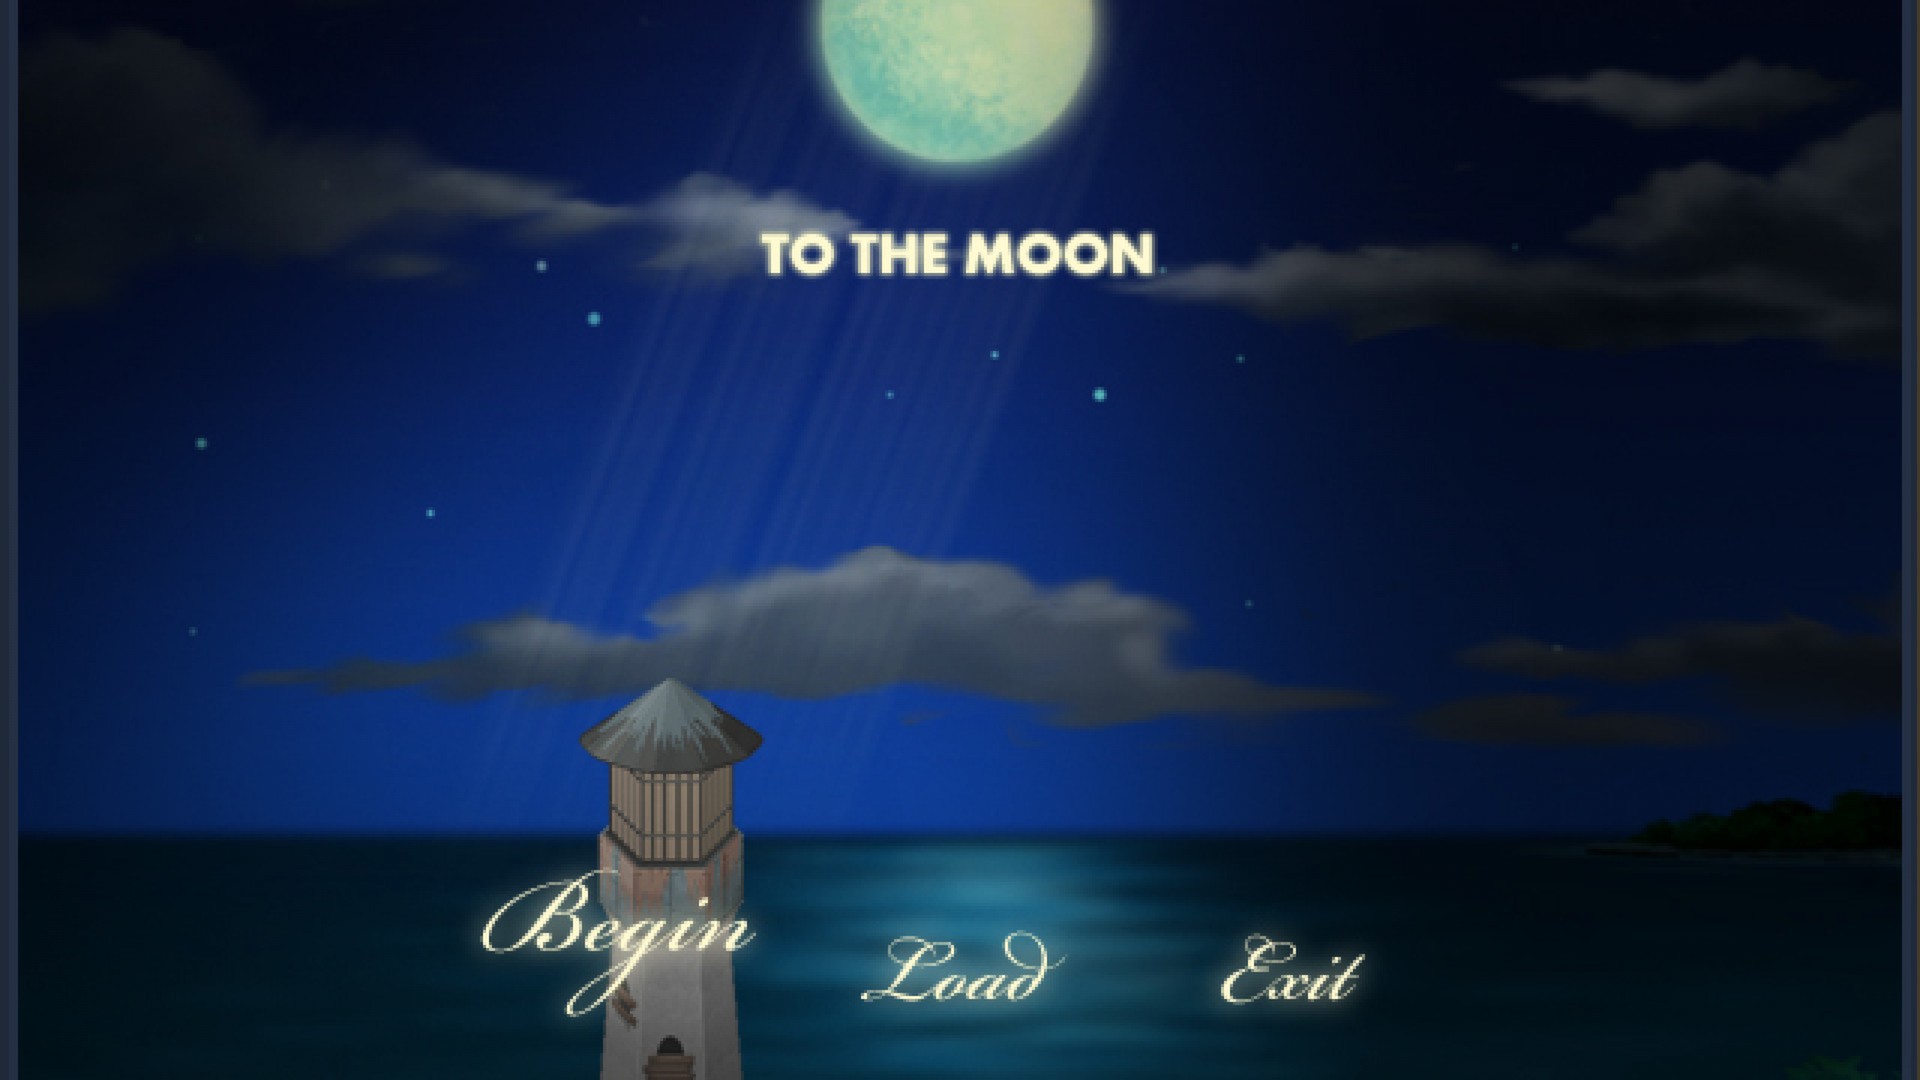 To the moon: a game of astronomical proportions